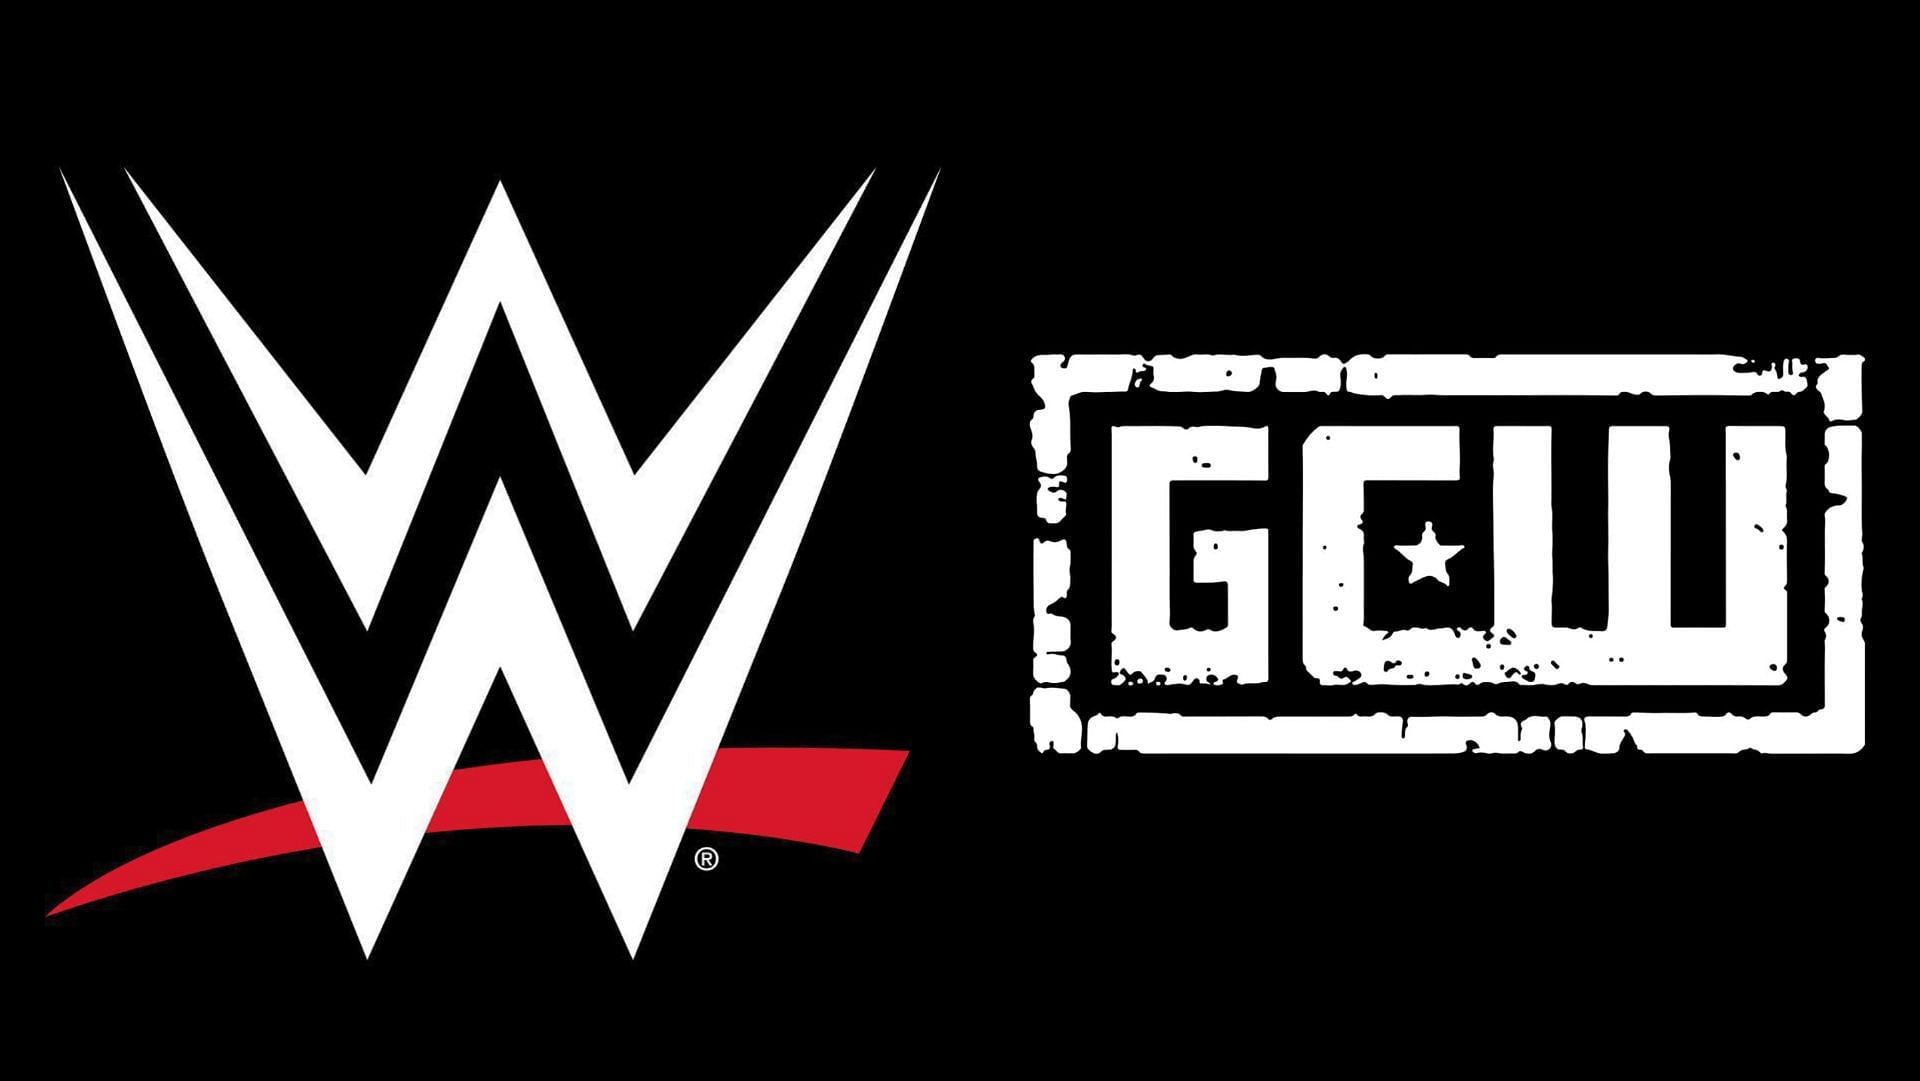 The official company logos for WWE and GCW